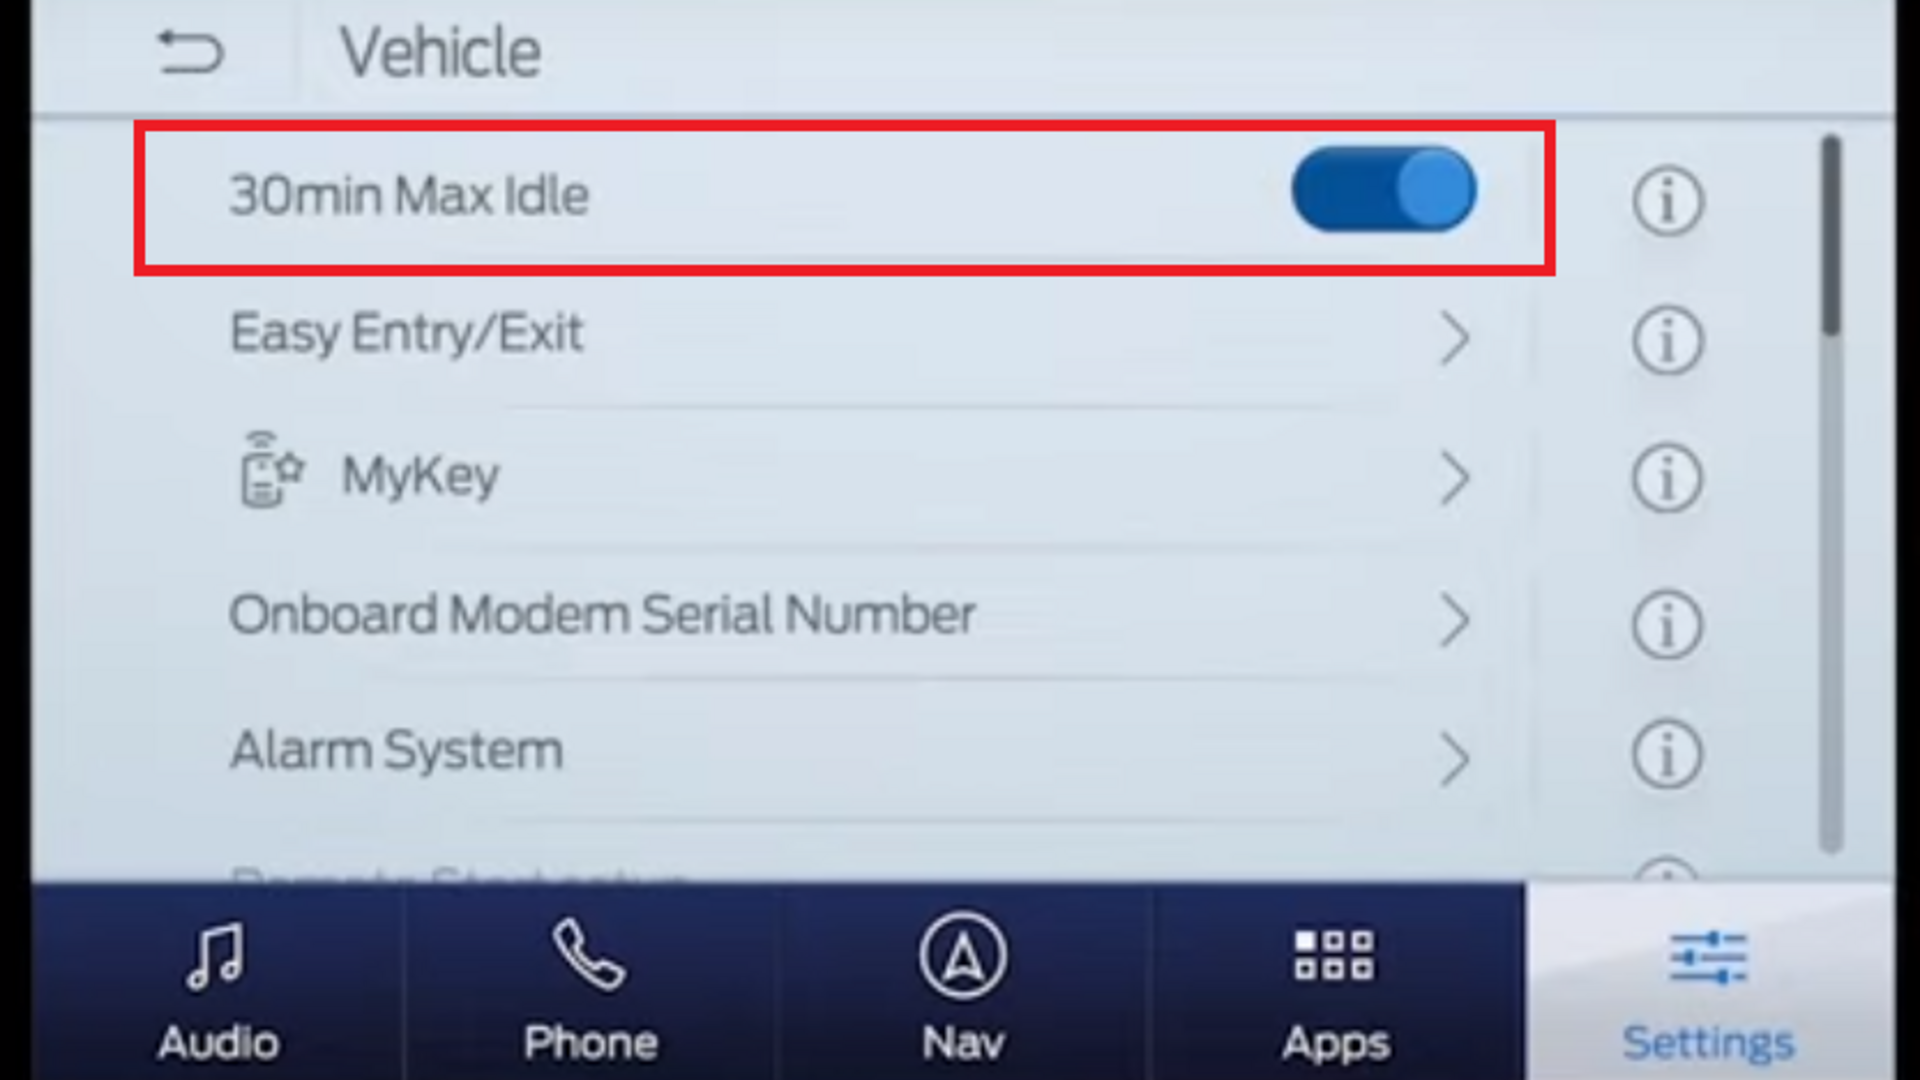 Disable engine shut off by going through Settings then Vehicle then toggle 30min Max Idle to Off